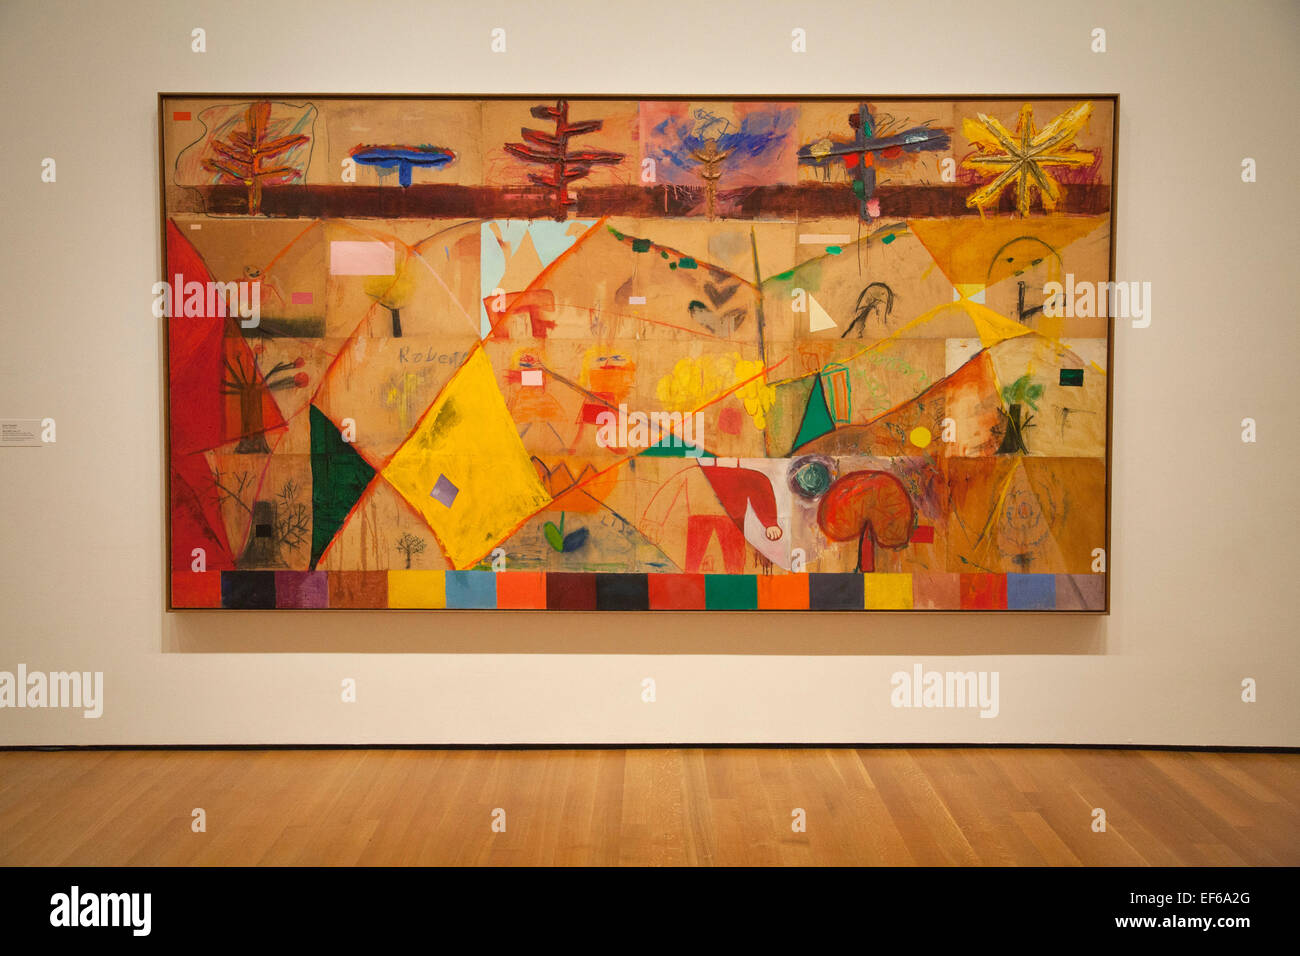 Sweet Caty's song, 1978, painting by Joan Snyder, MOMA, museum of modern art, New York, USA, America Stock Photo